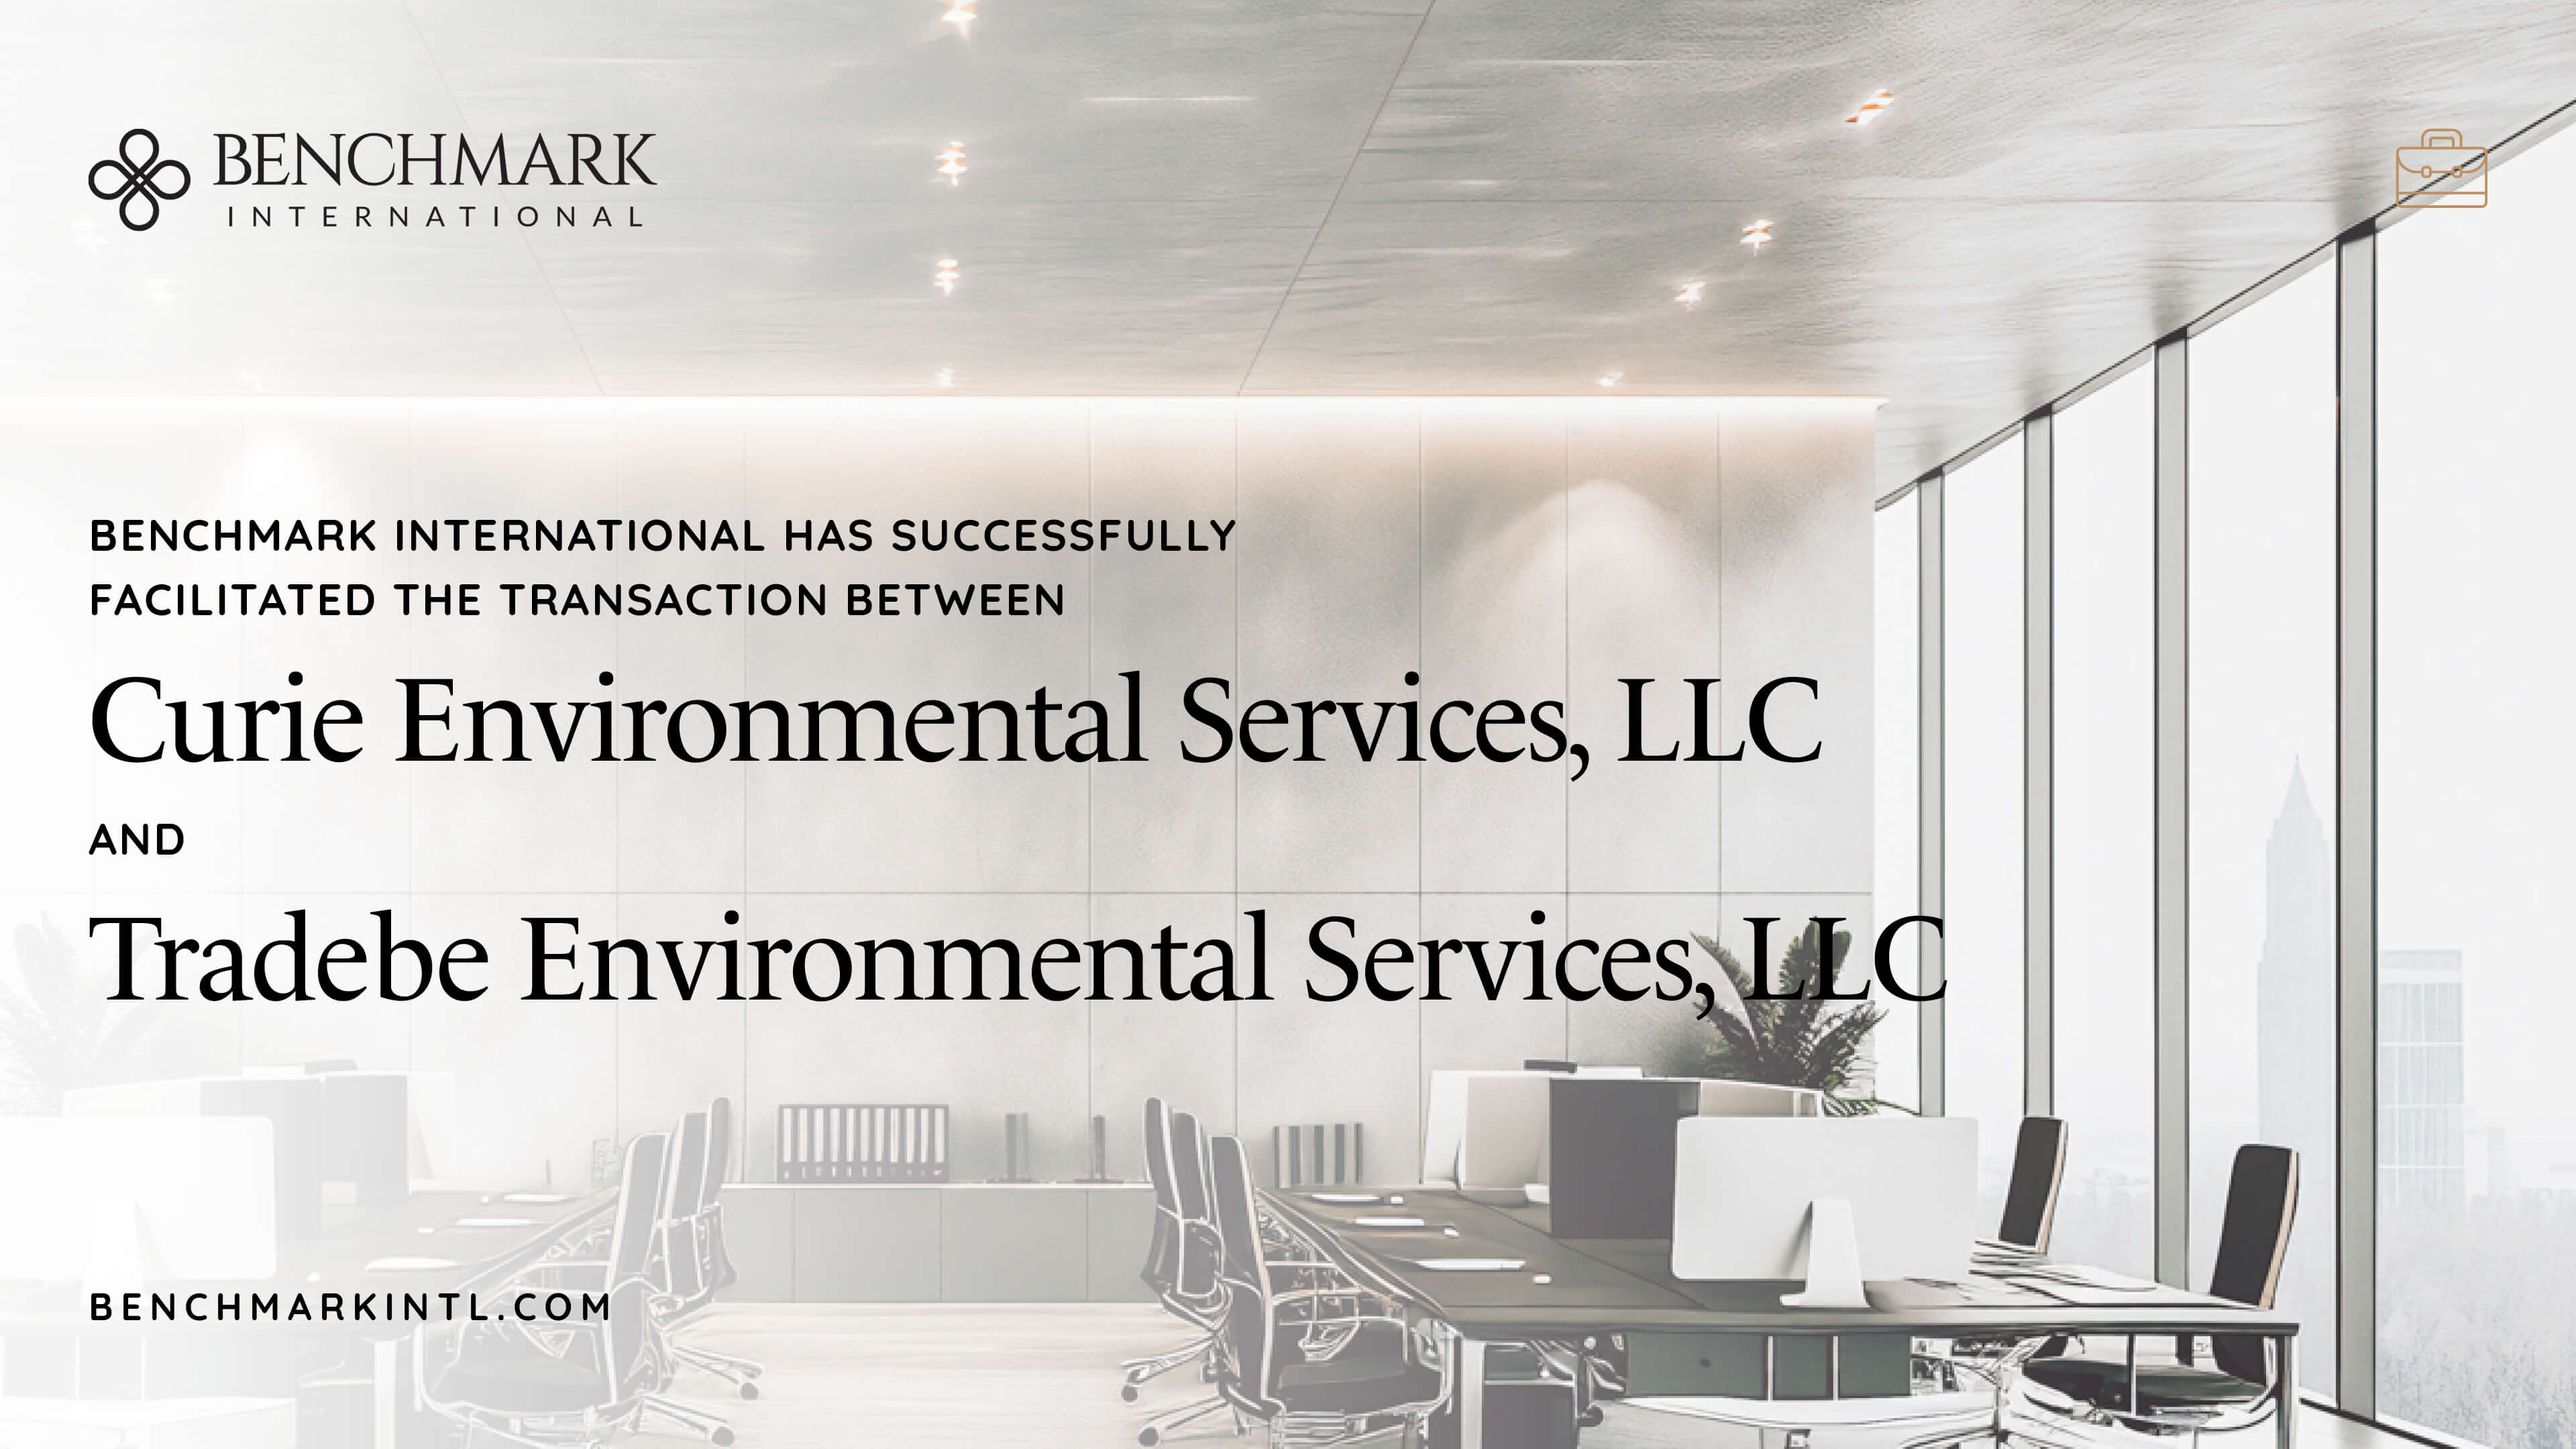 Benchmark International Has Successfully Facilitated the Transaction Between Curie Environmental Services, LLC and Tradebe Environmental Services, LLC